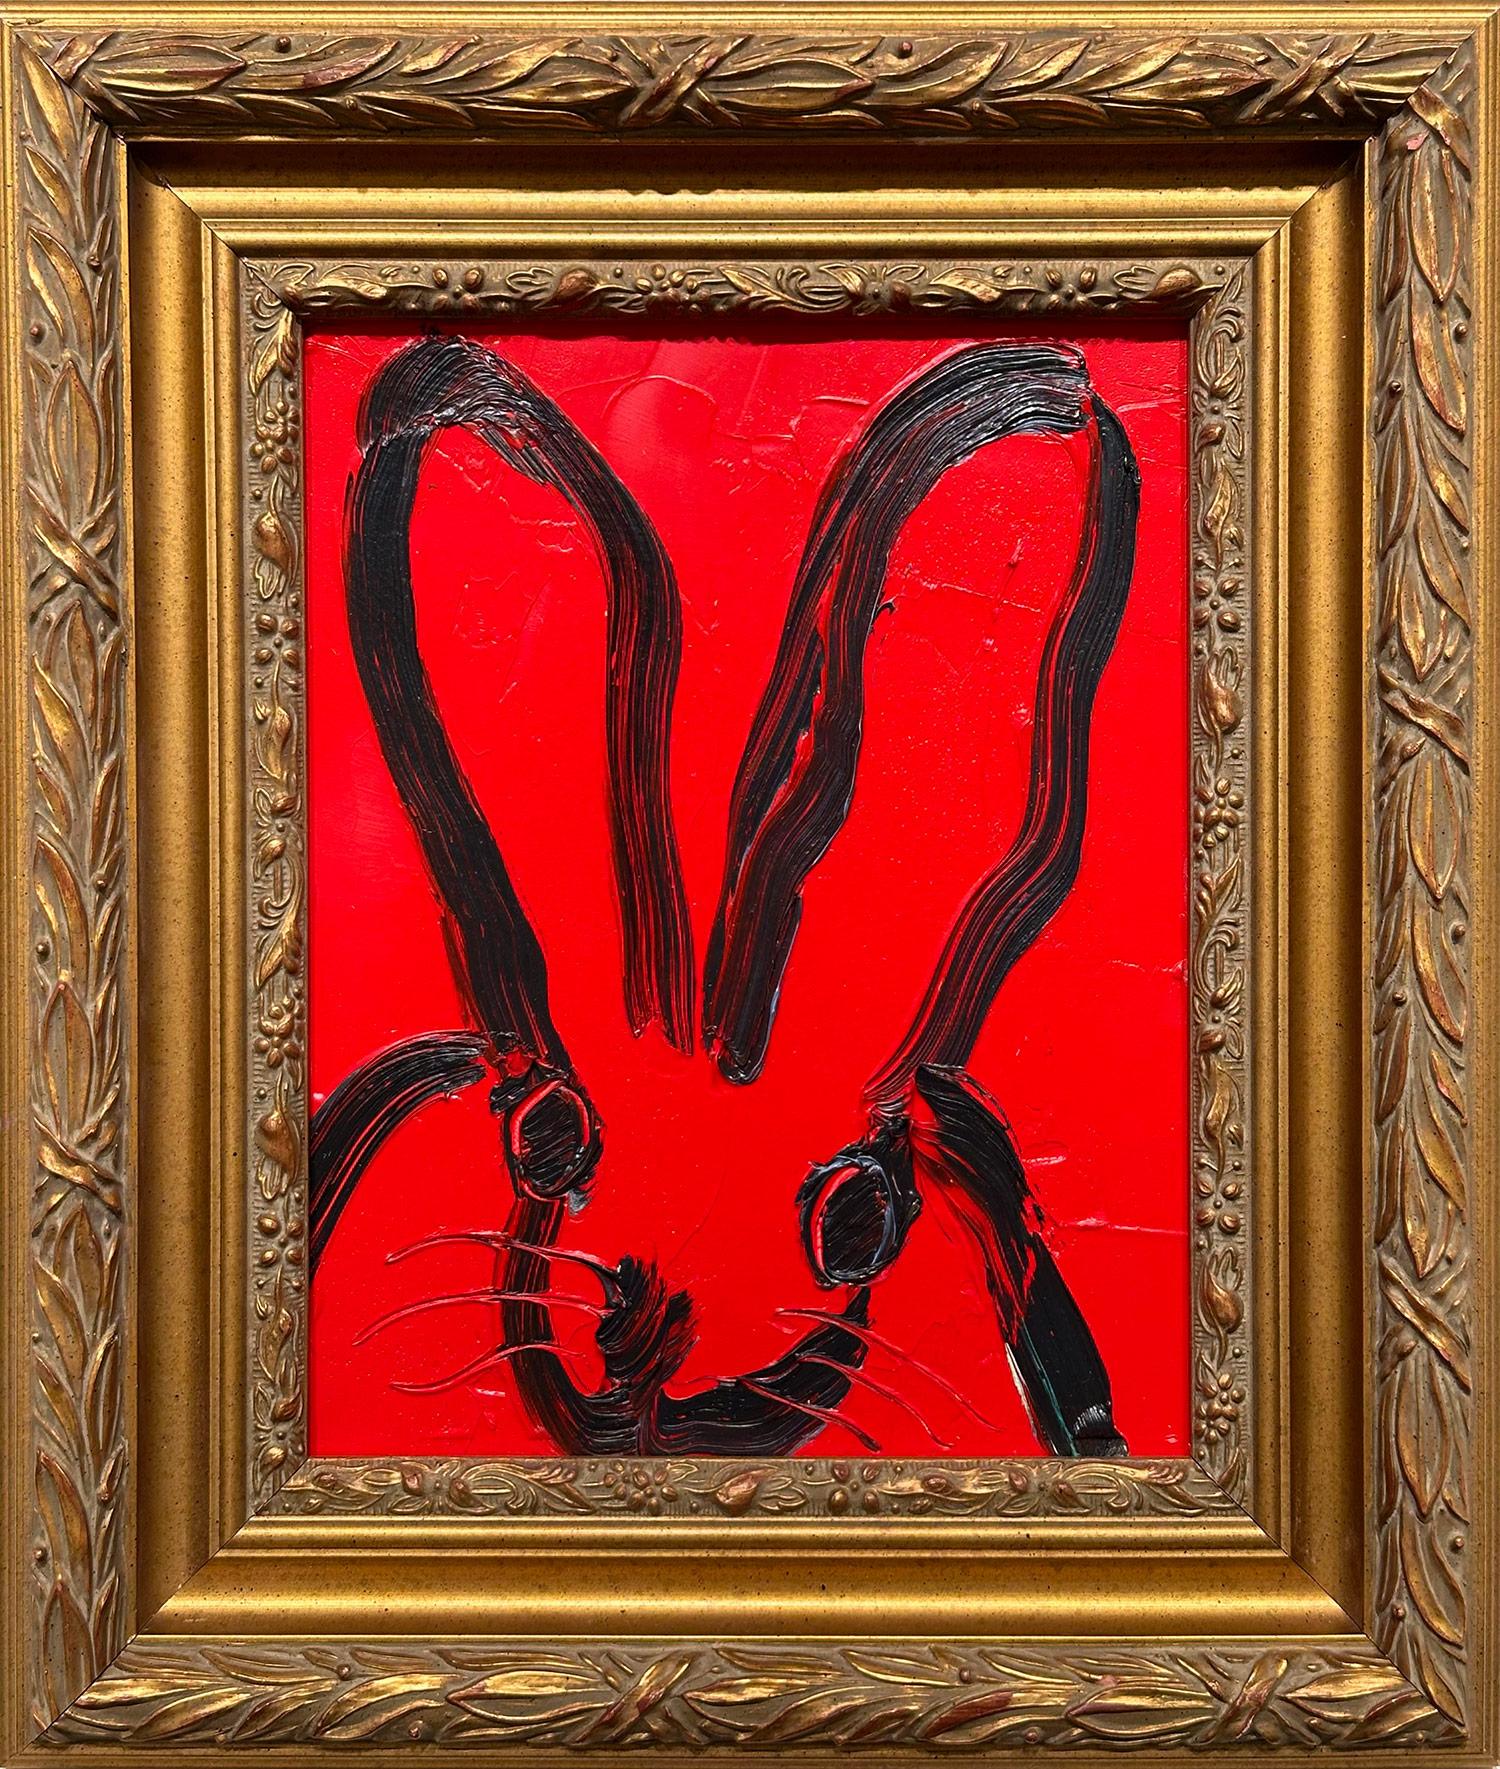 Hunt Slonem Abstract Painting - "Untitled" Black Outlined Bunny on Red Velvet Background with Frame